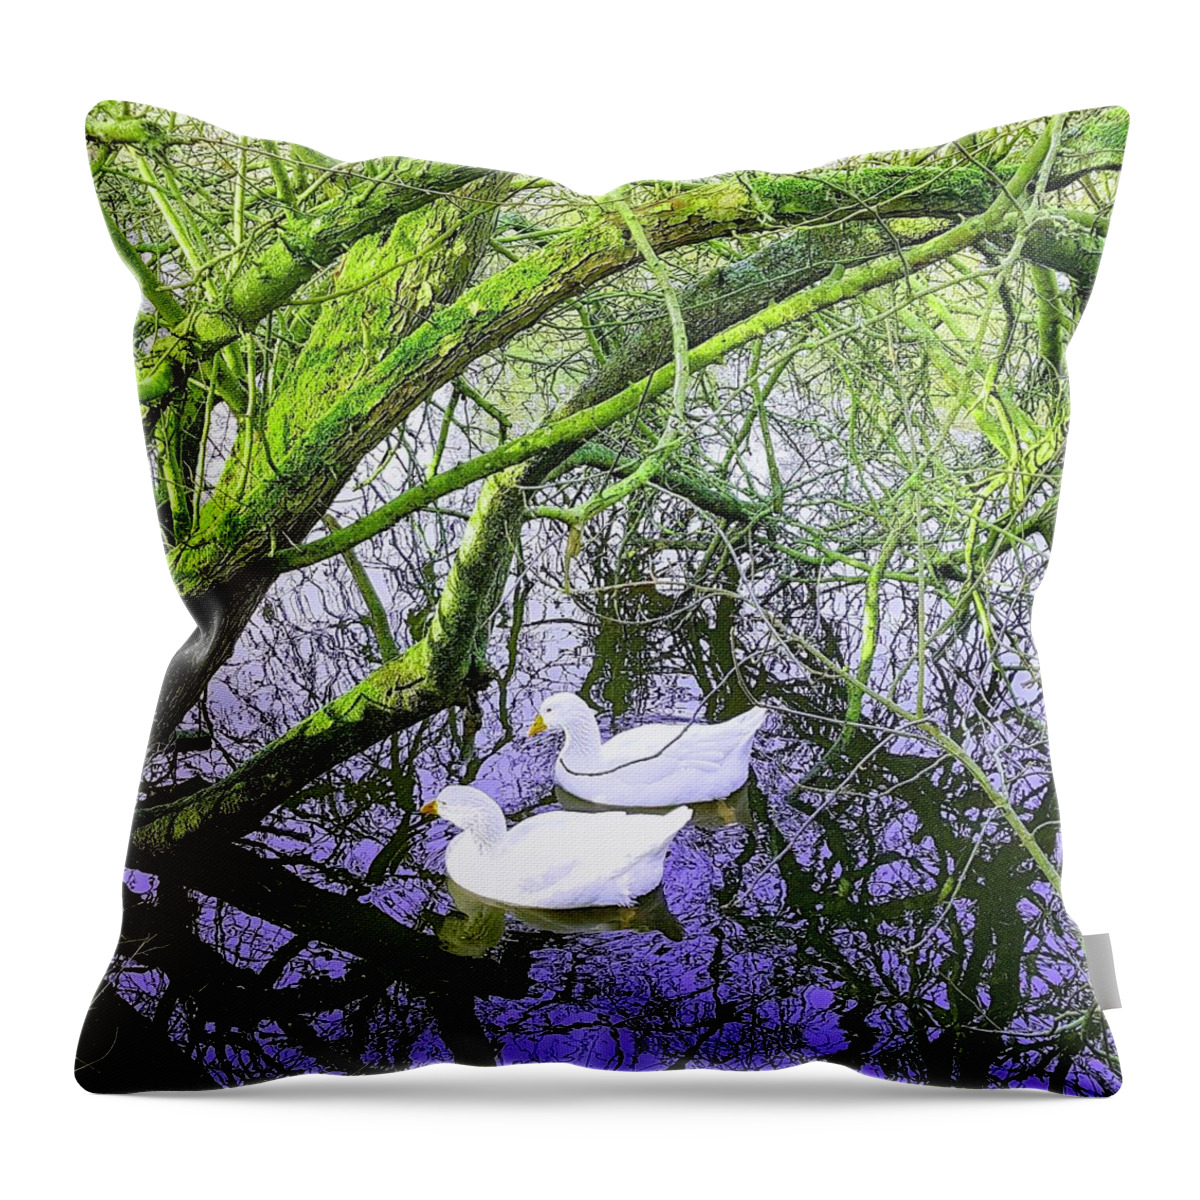 Countrylife Throw Pillow featuring the photograph Grace And Flow In Vivid Green by Rowena Tutty